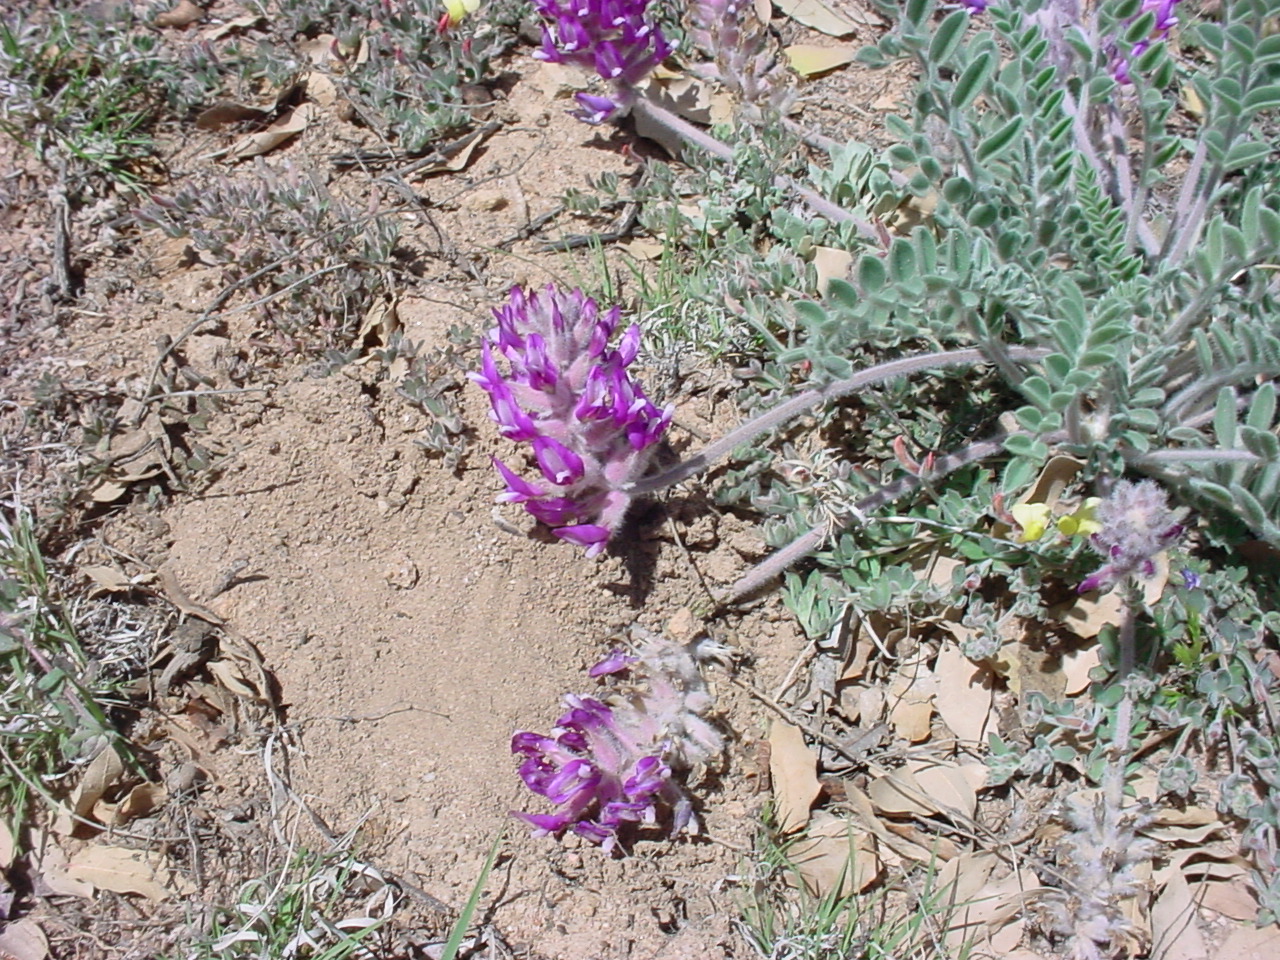 Growth habit showing a central basal rosette and inflorescences that have fallen outward due to the weight of the flowers